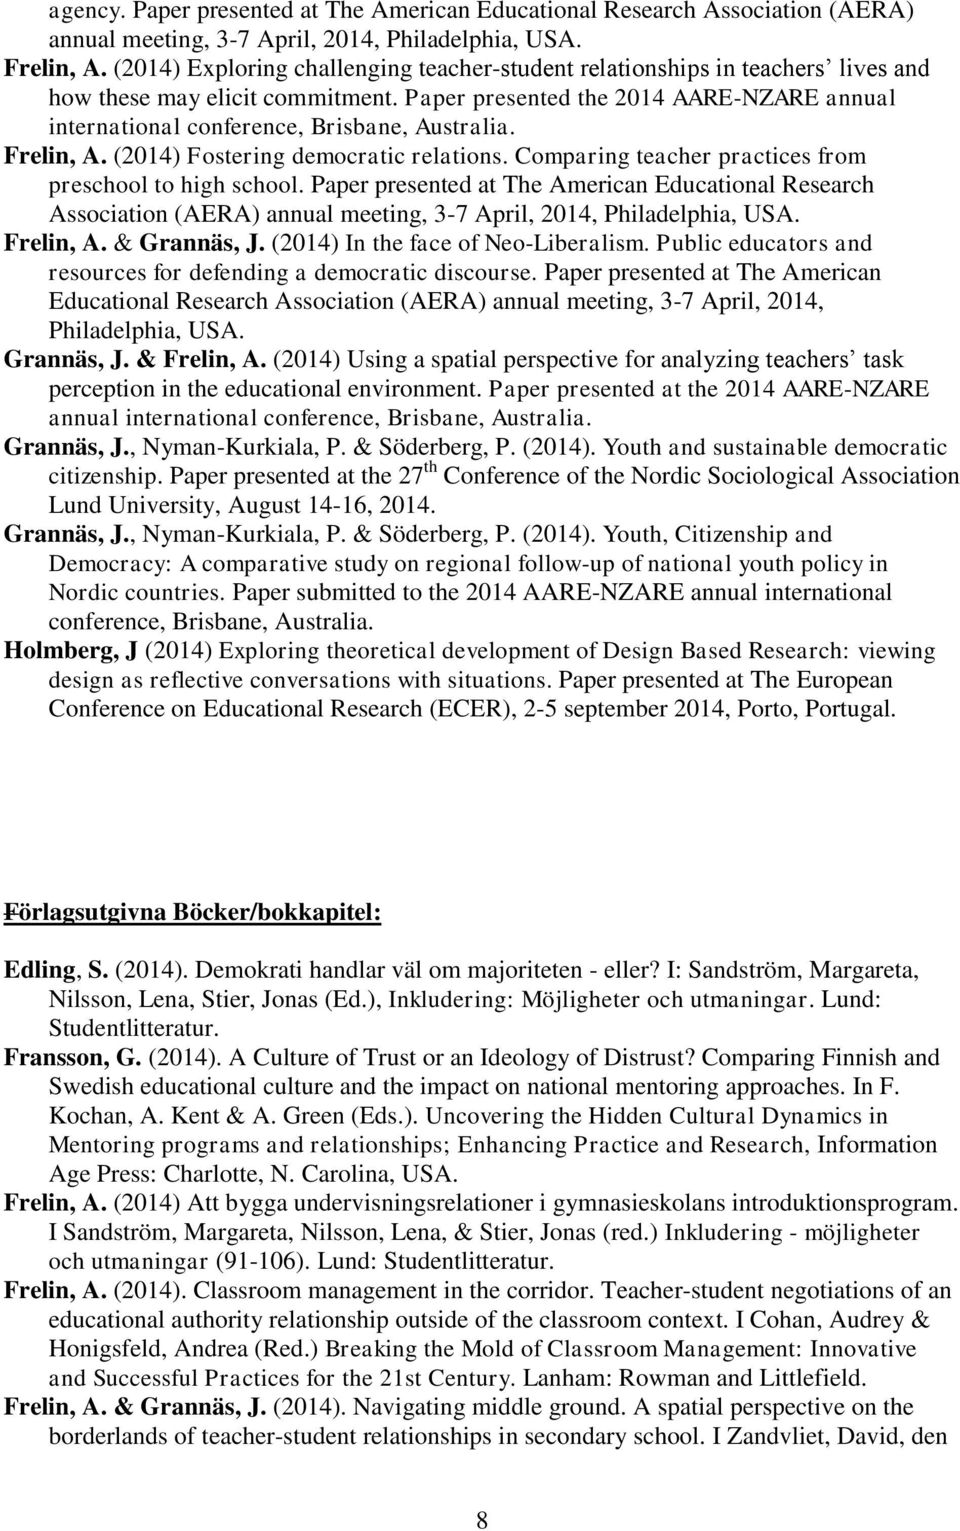 Paper presented the 2014 AARE-NZARE annual international conference, Brisbane, Australia. Frelin, A. (2014) Fostering democratic relations. Comparing teacher practices from preschool to high school.